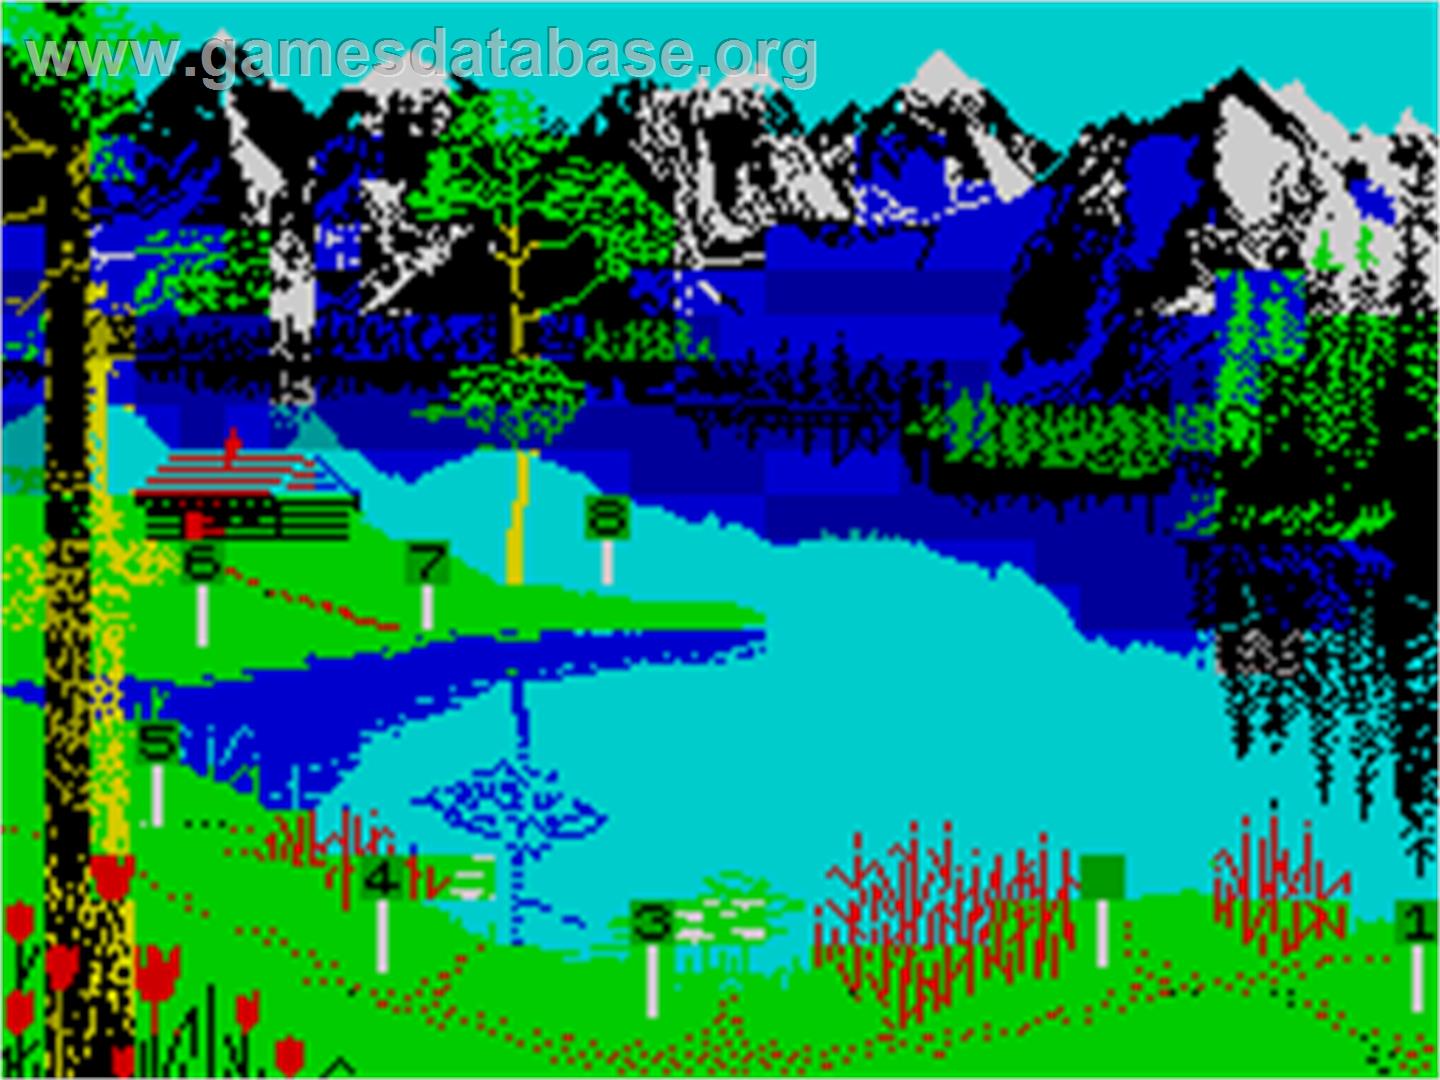 Jack Charlton's Match Fishing - Sinclair ZX Spectrum - Artwork - In Game